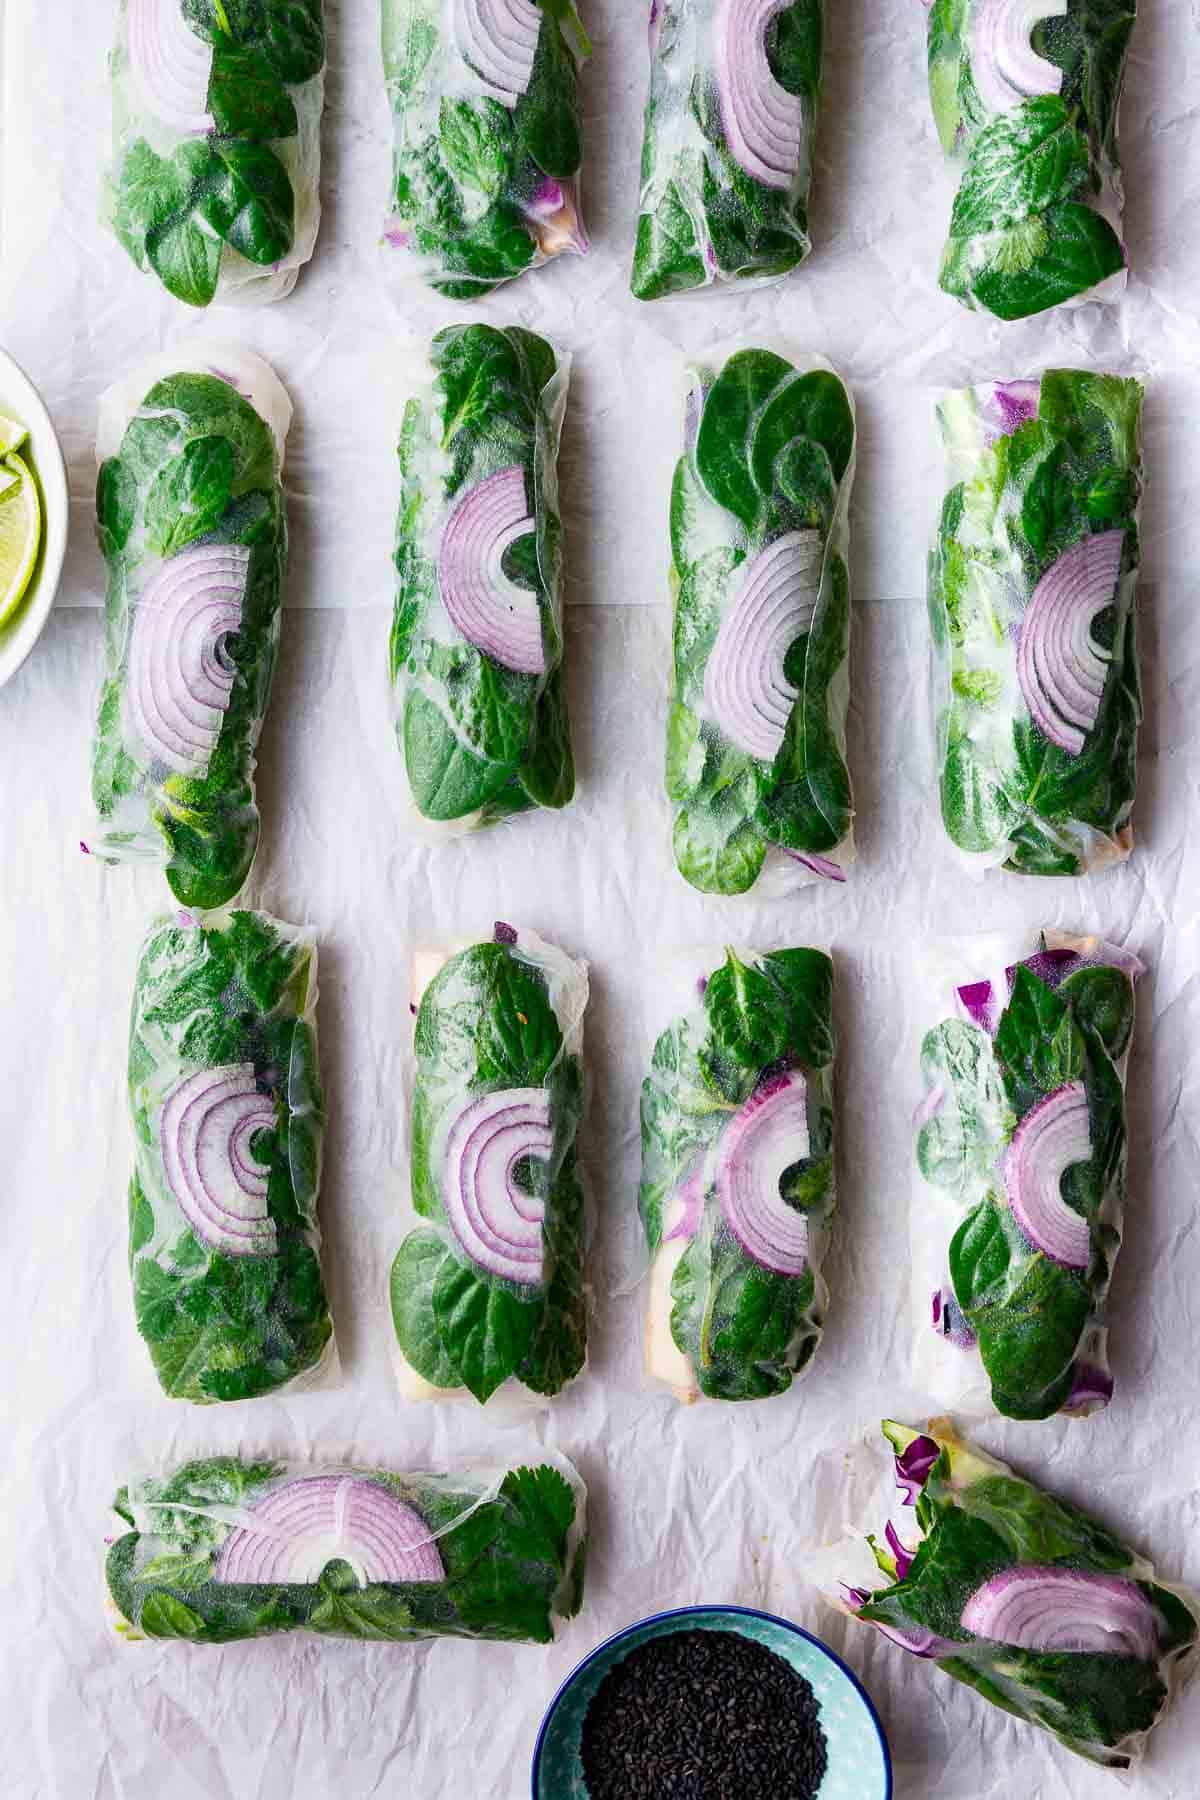 An overhead view of 14 green and purple summer rolls on white parchment, with bowls of dipping sauce and limes next to them.